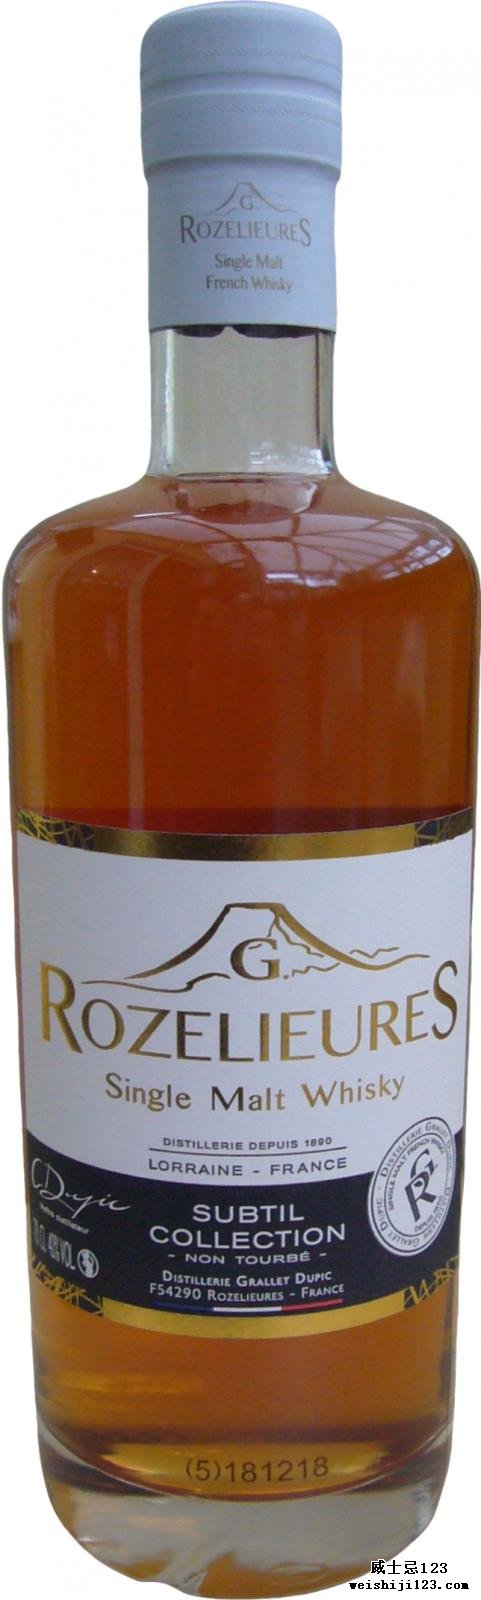 G. Rozelieures Subtil Collection